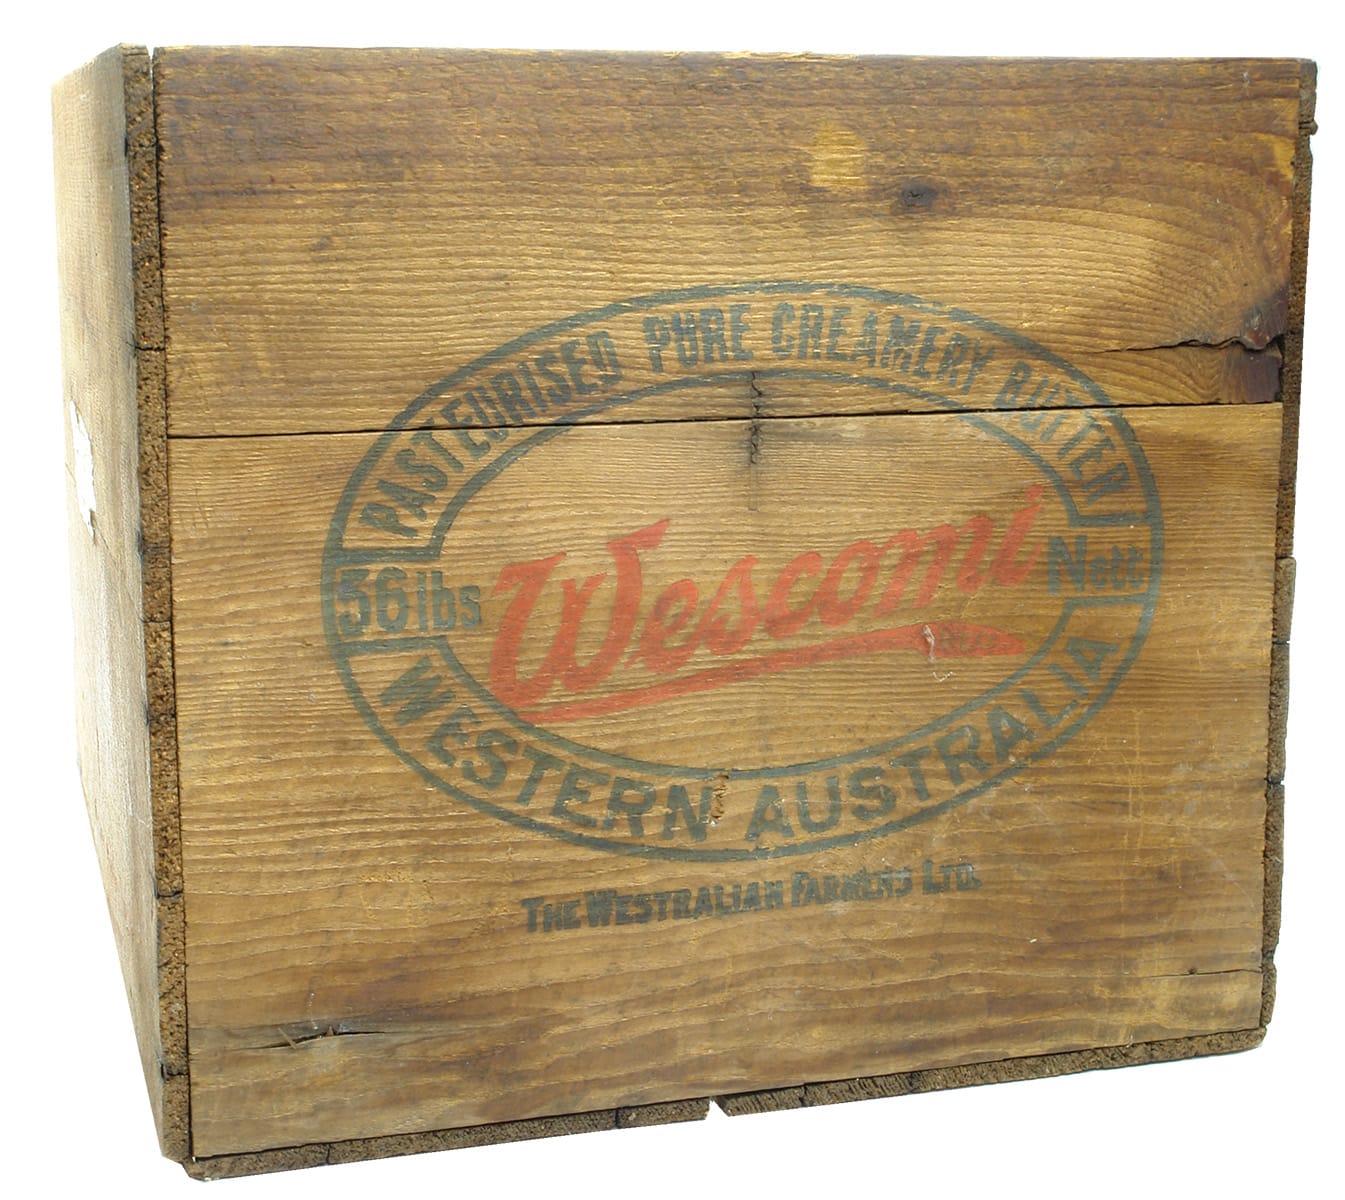 Wescomi Pasteurised Pure Creamery Butter Box